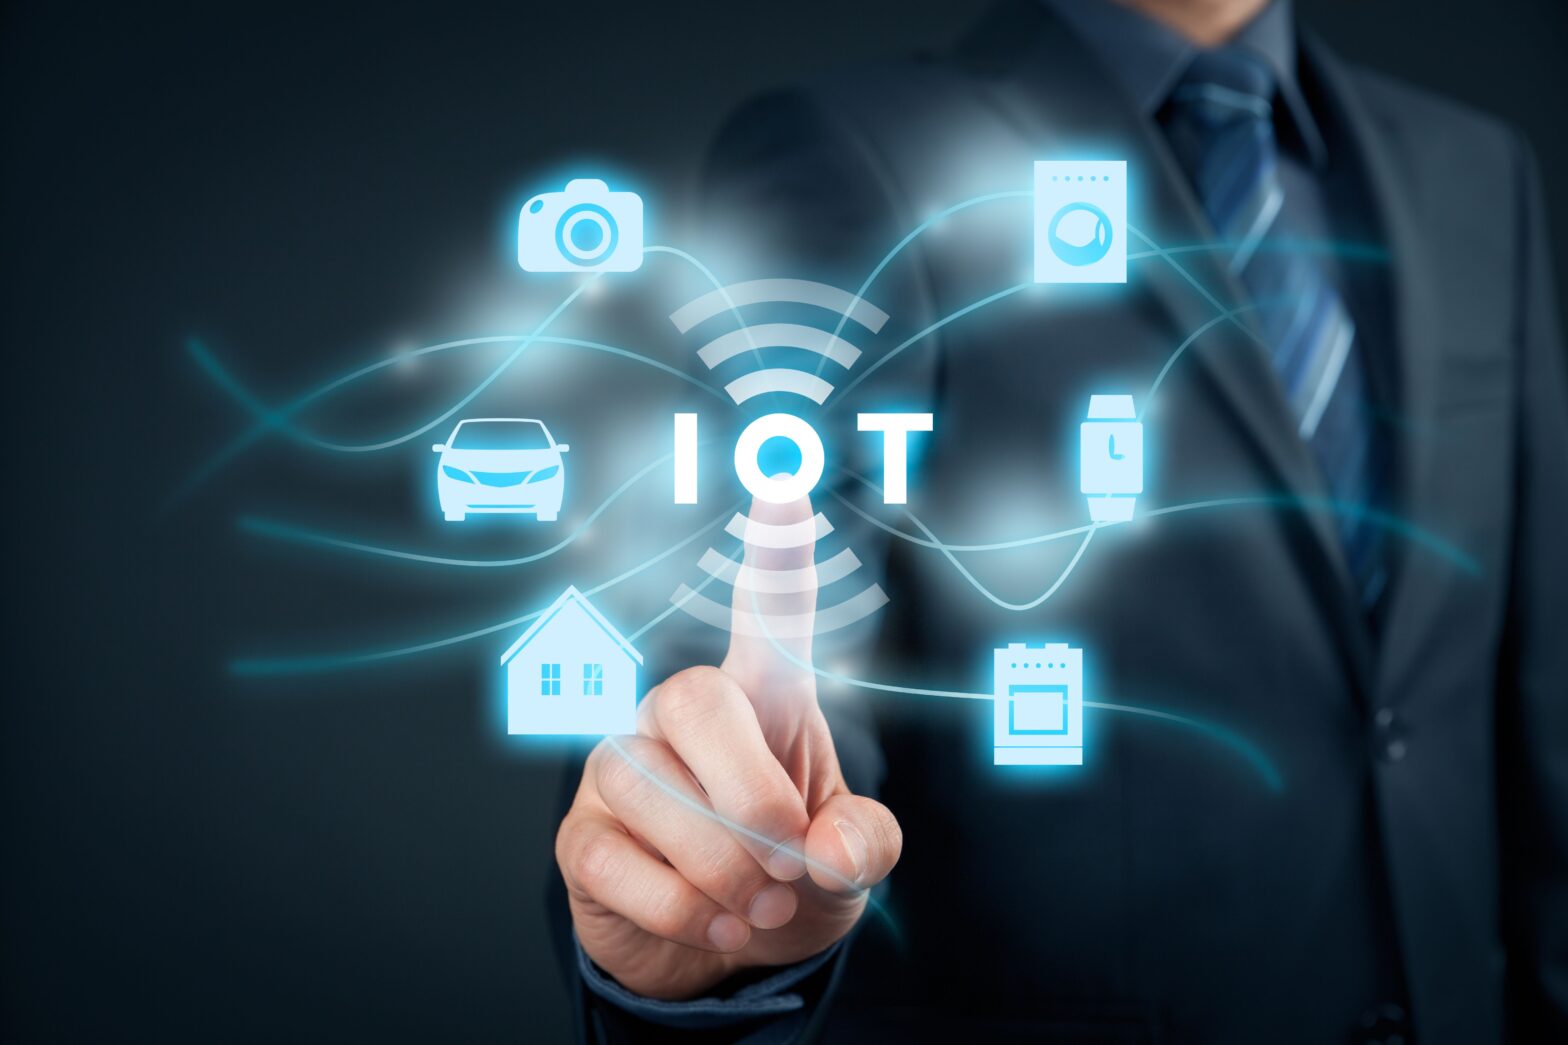 Embedded Security For Internet Of Things Market